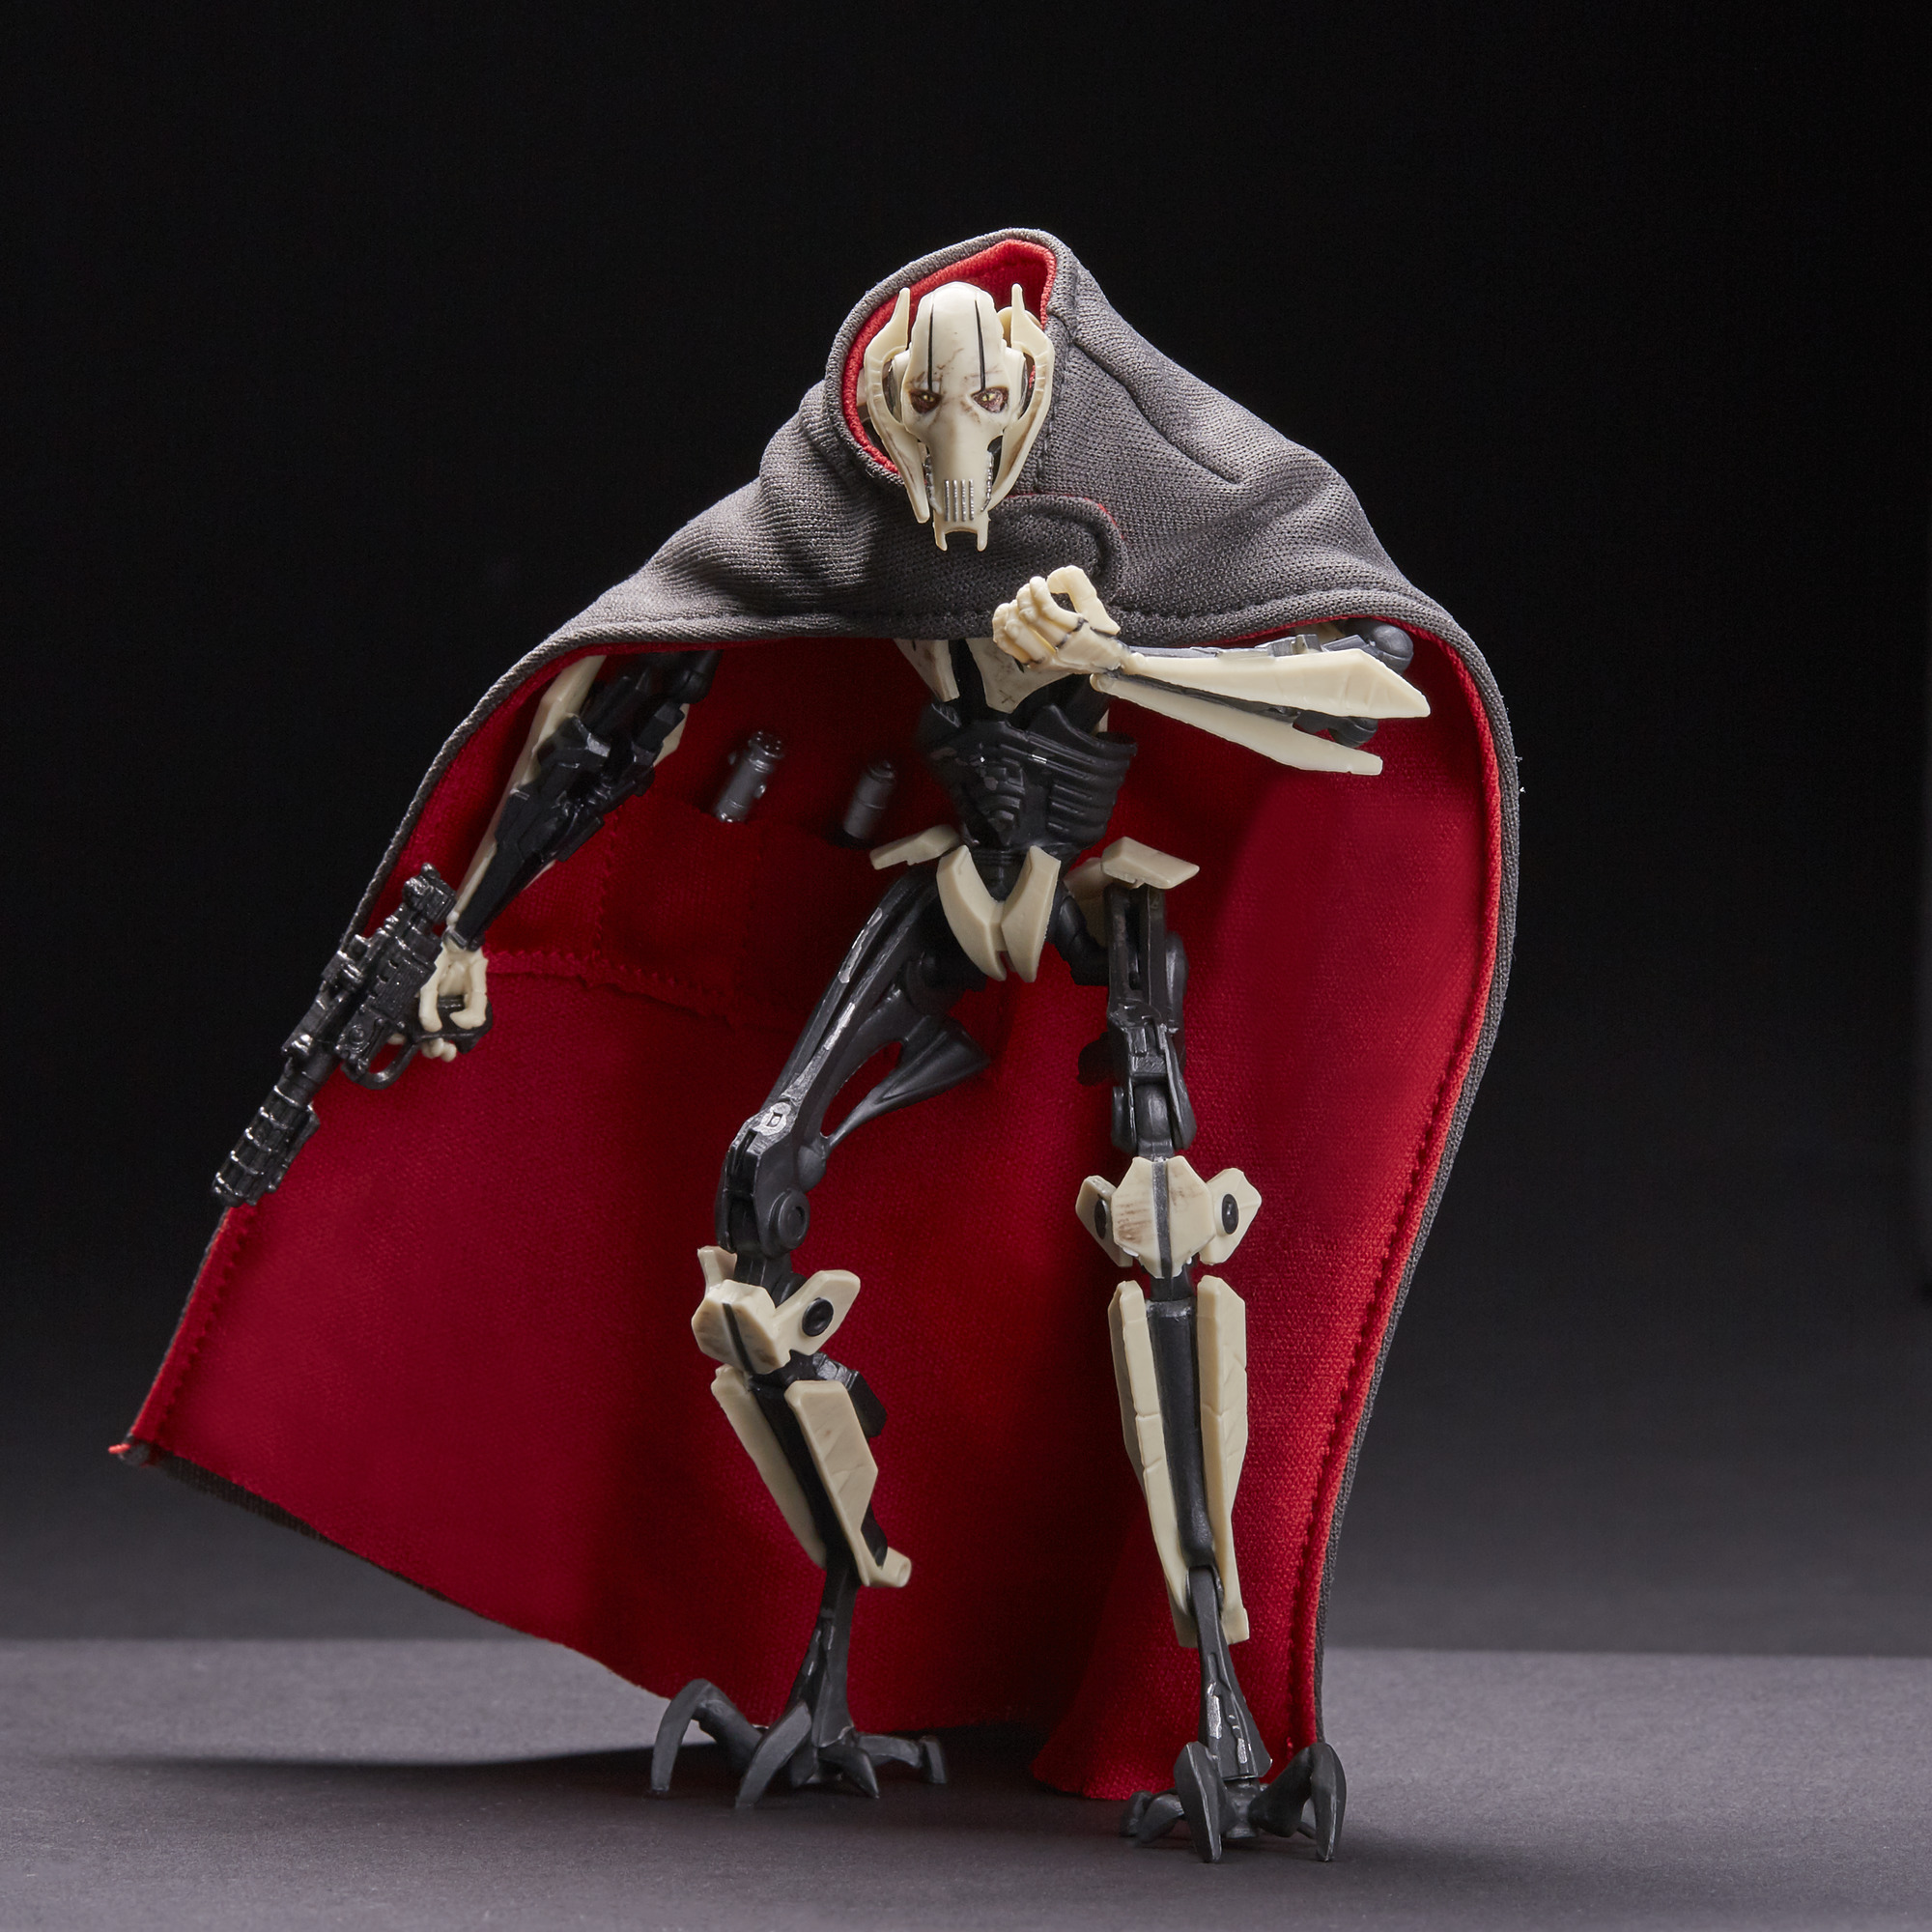 Star Wars: The Black Series General Grievous Kids Toy Action Figure for Boys and Girls (9”) - image 5 of 8